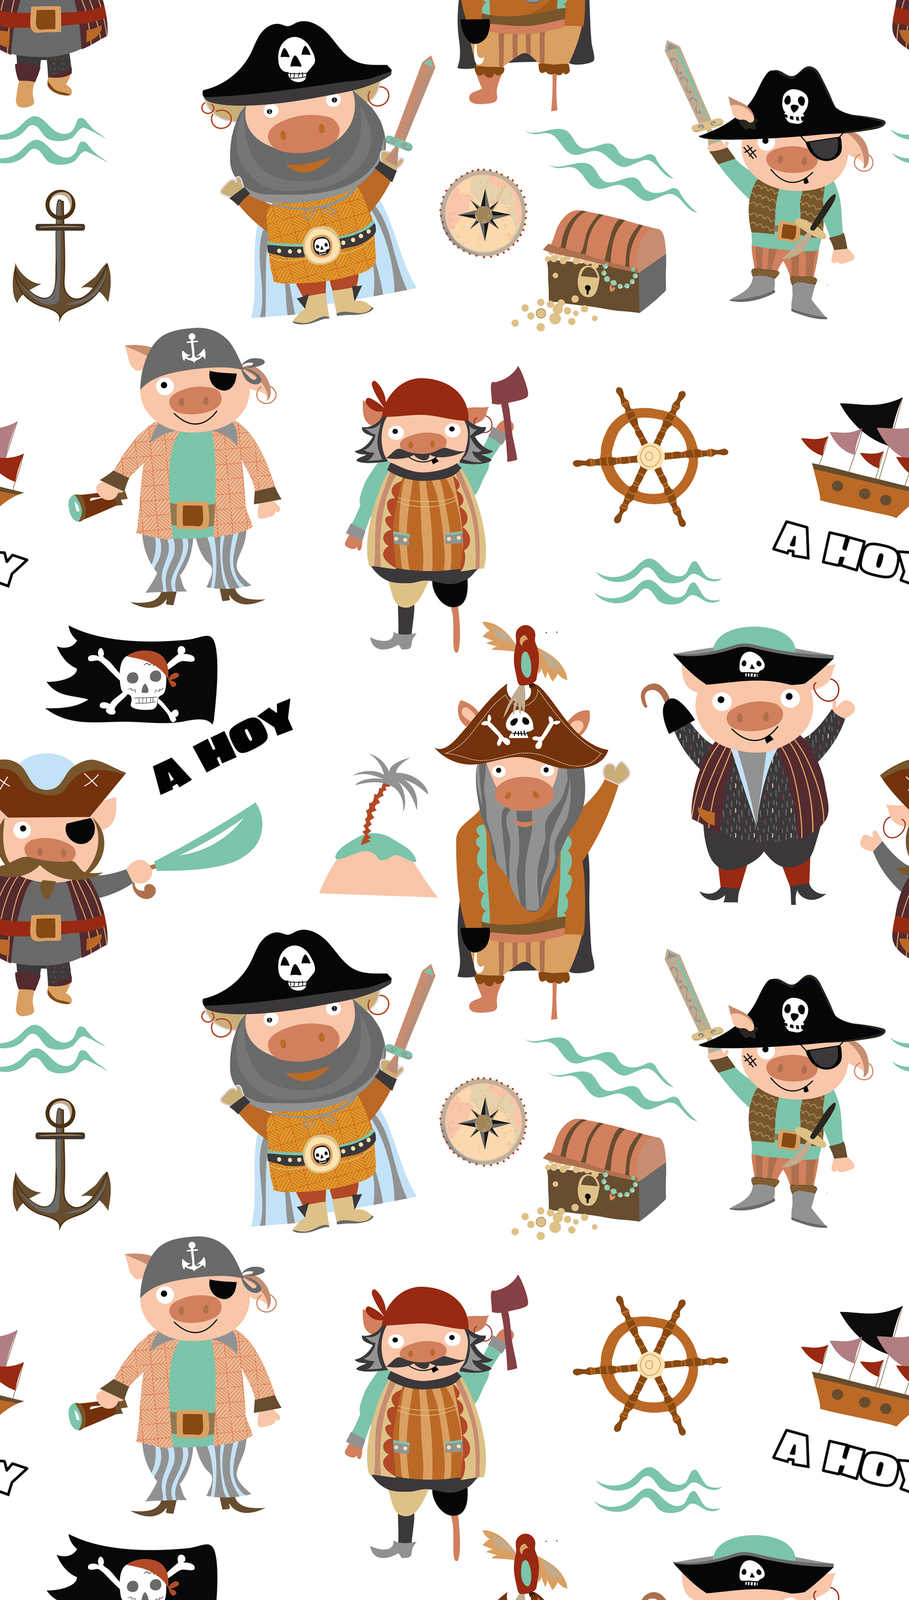             Children's wallpaper with various pirates and symbols - colourful, cream, brown
        